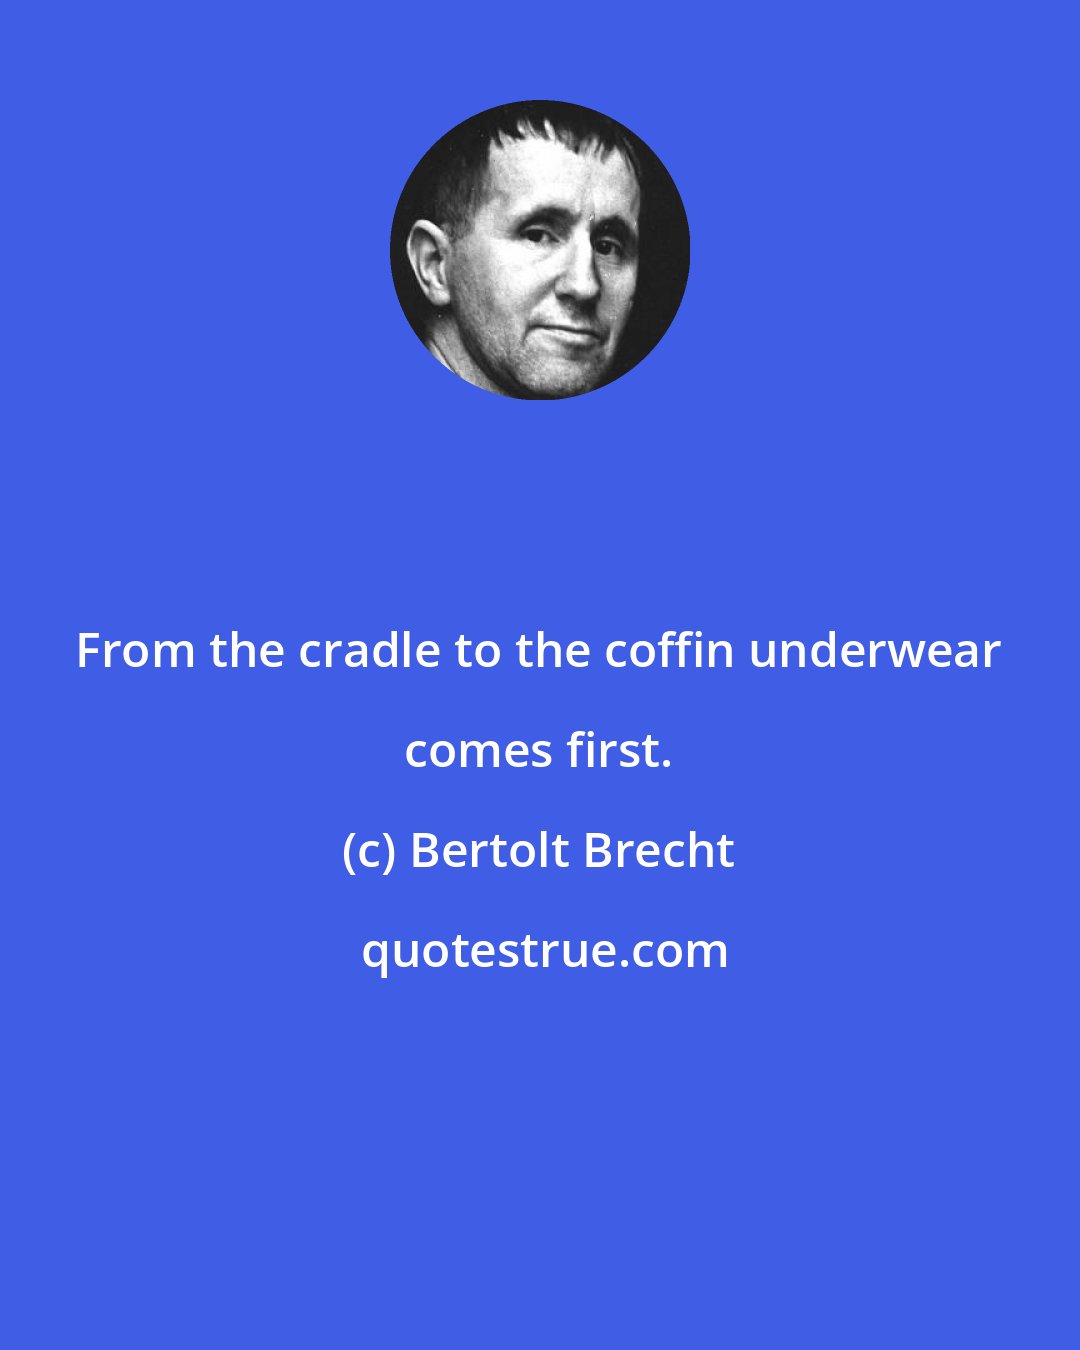 Bertolt Brecht: From the cradle to the coffin underwear comes first.